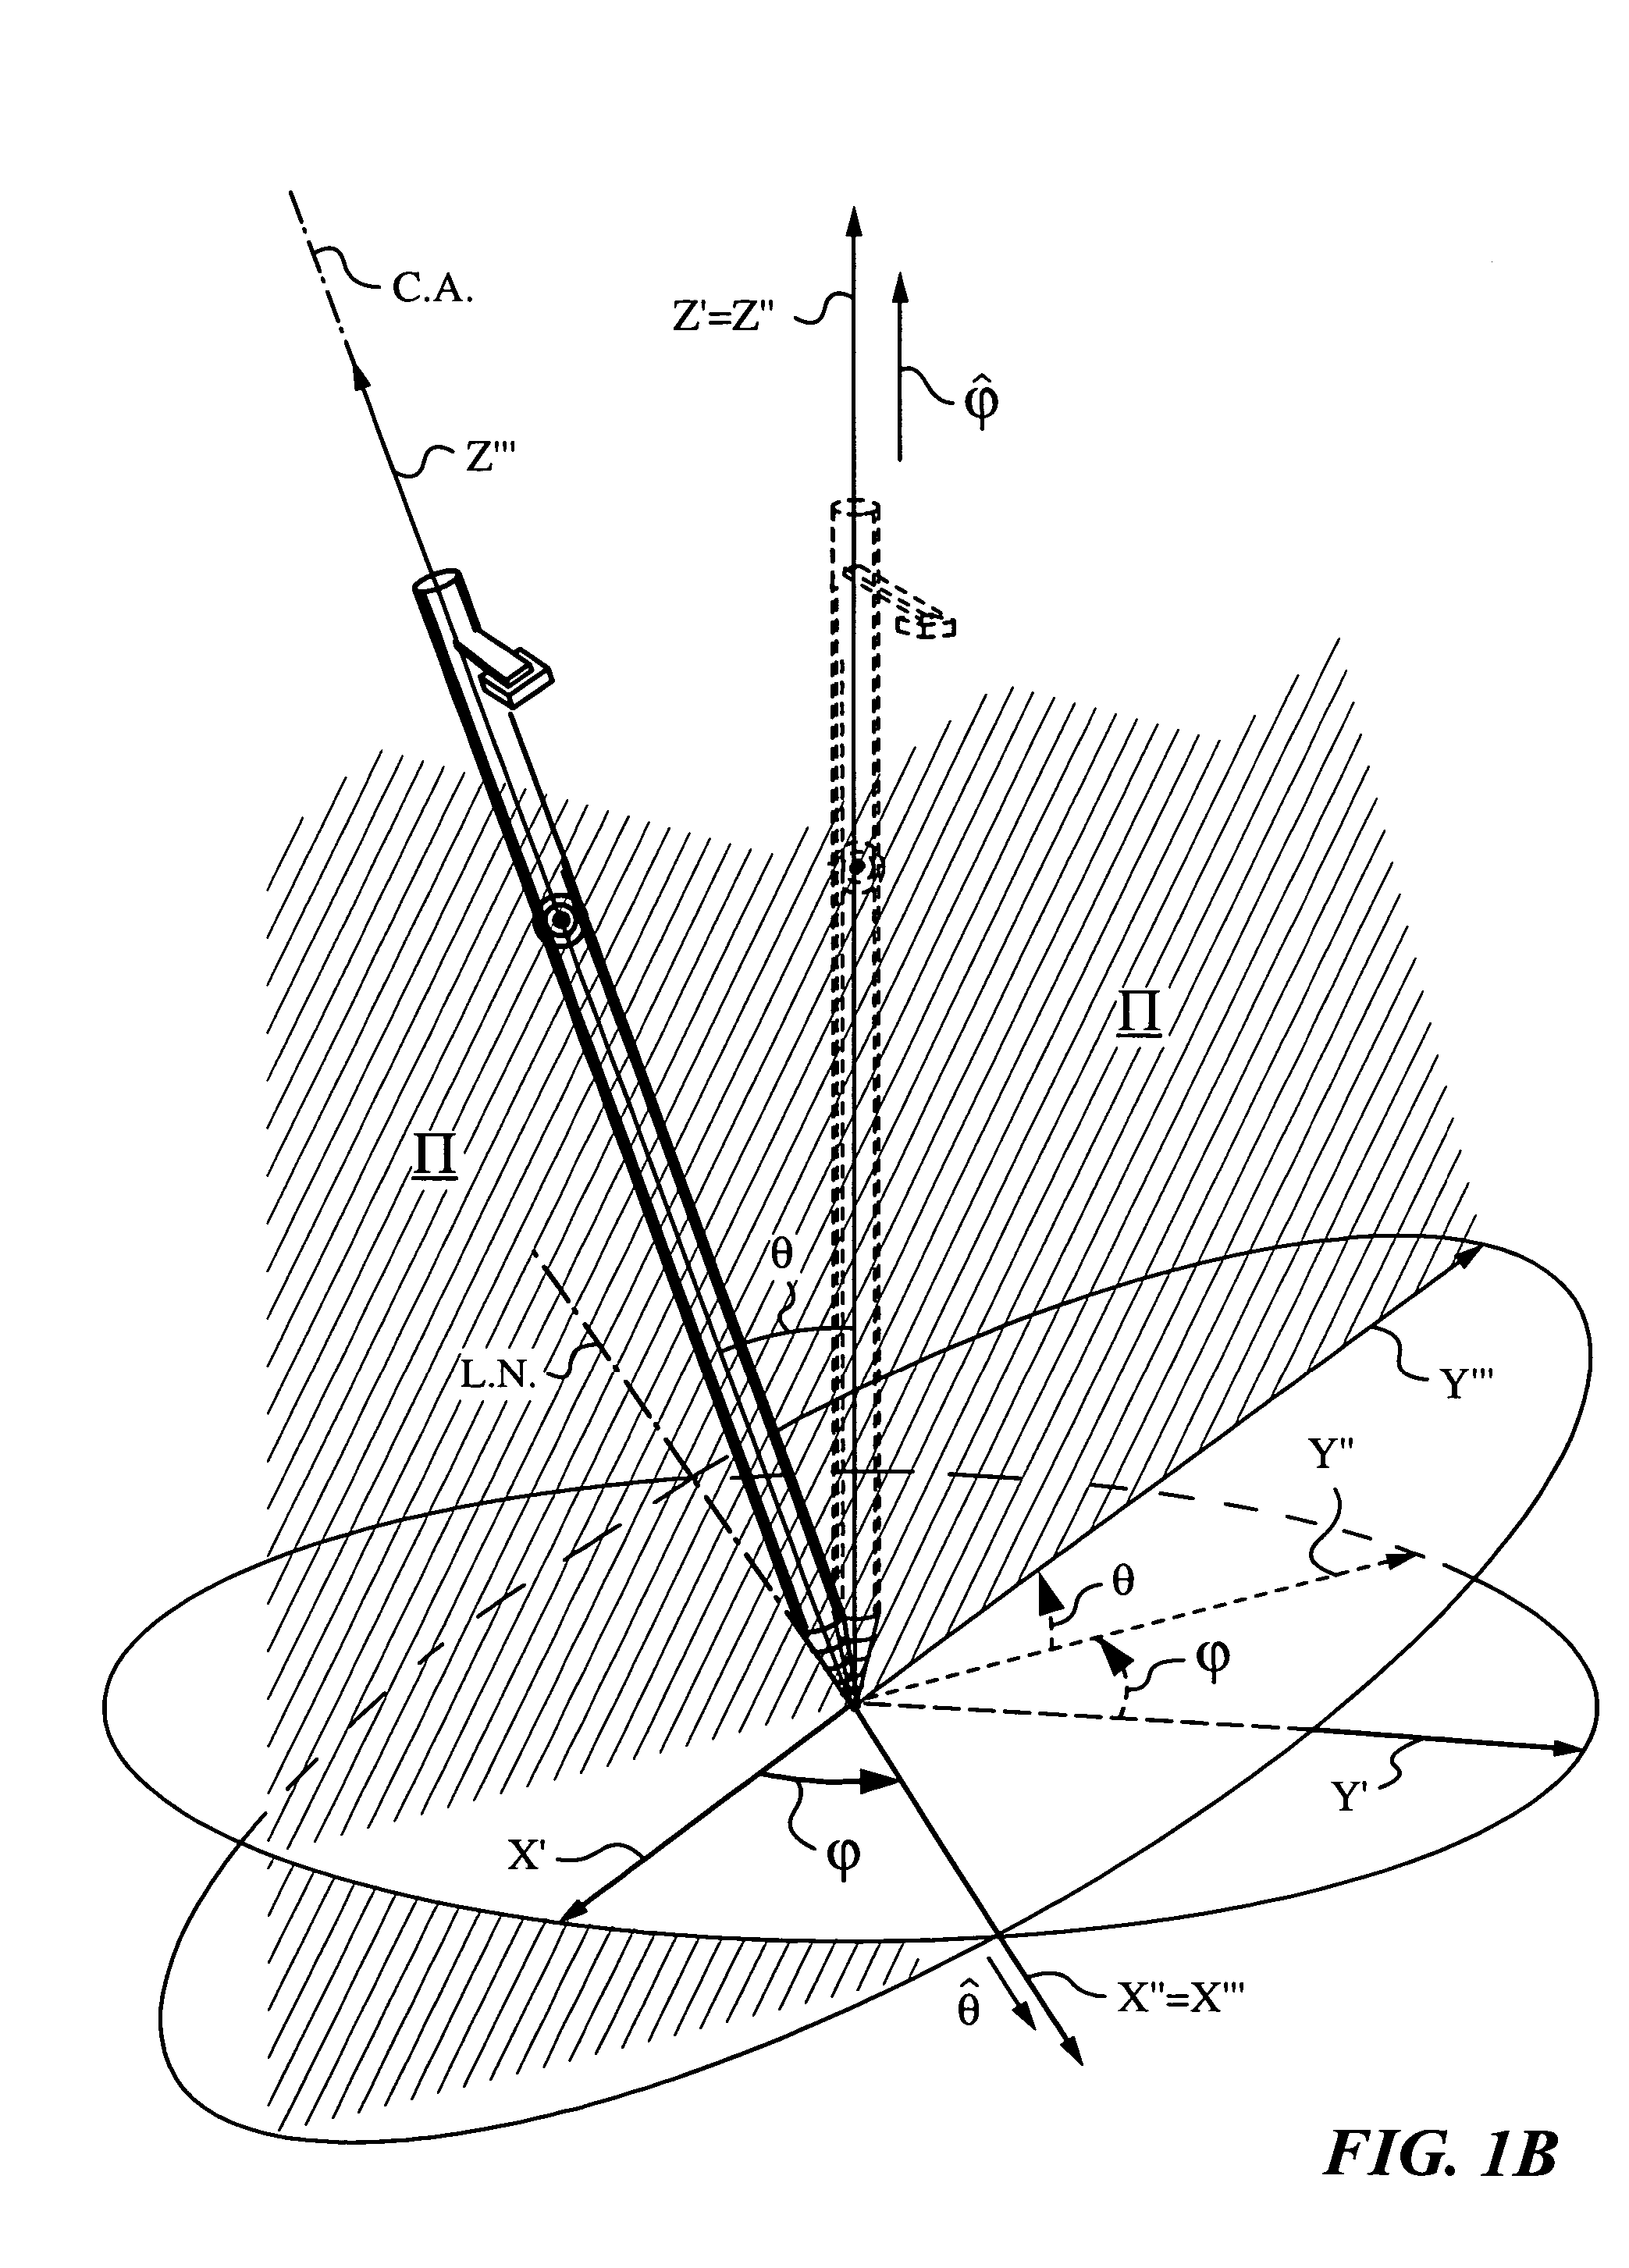 Method and apparatus for determining absolute position of a tip of an elongate object on a plane surface with invariant features